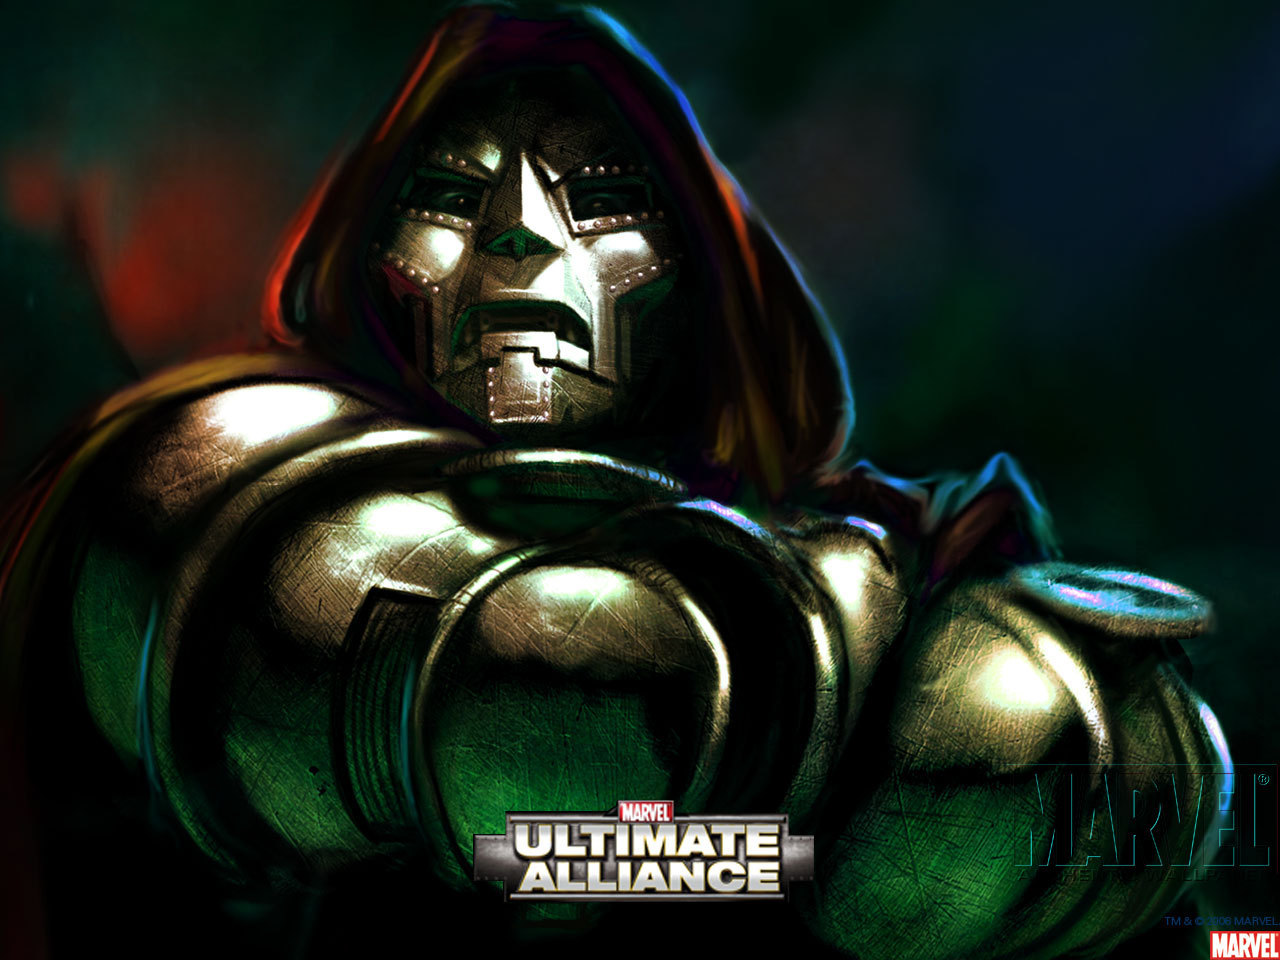 Marvel Ics Image Dr Doom HD Wallpaper And Background Photos